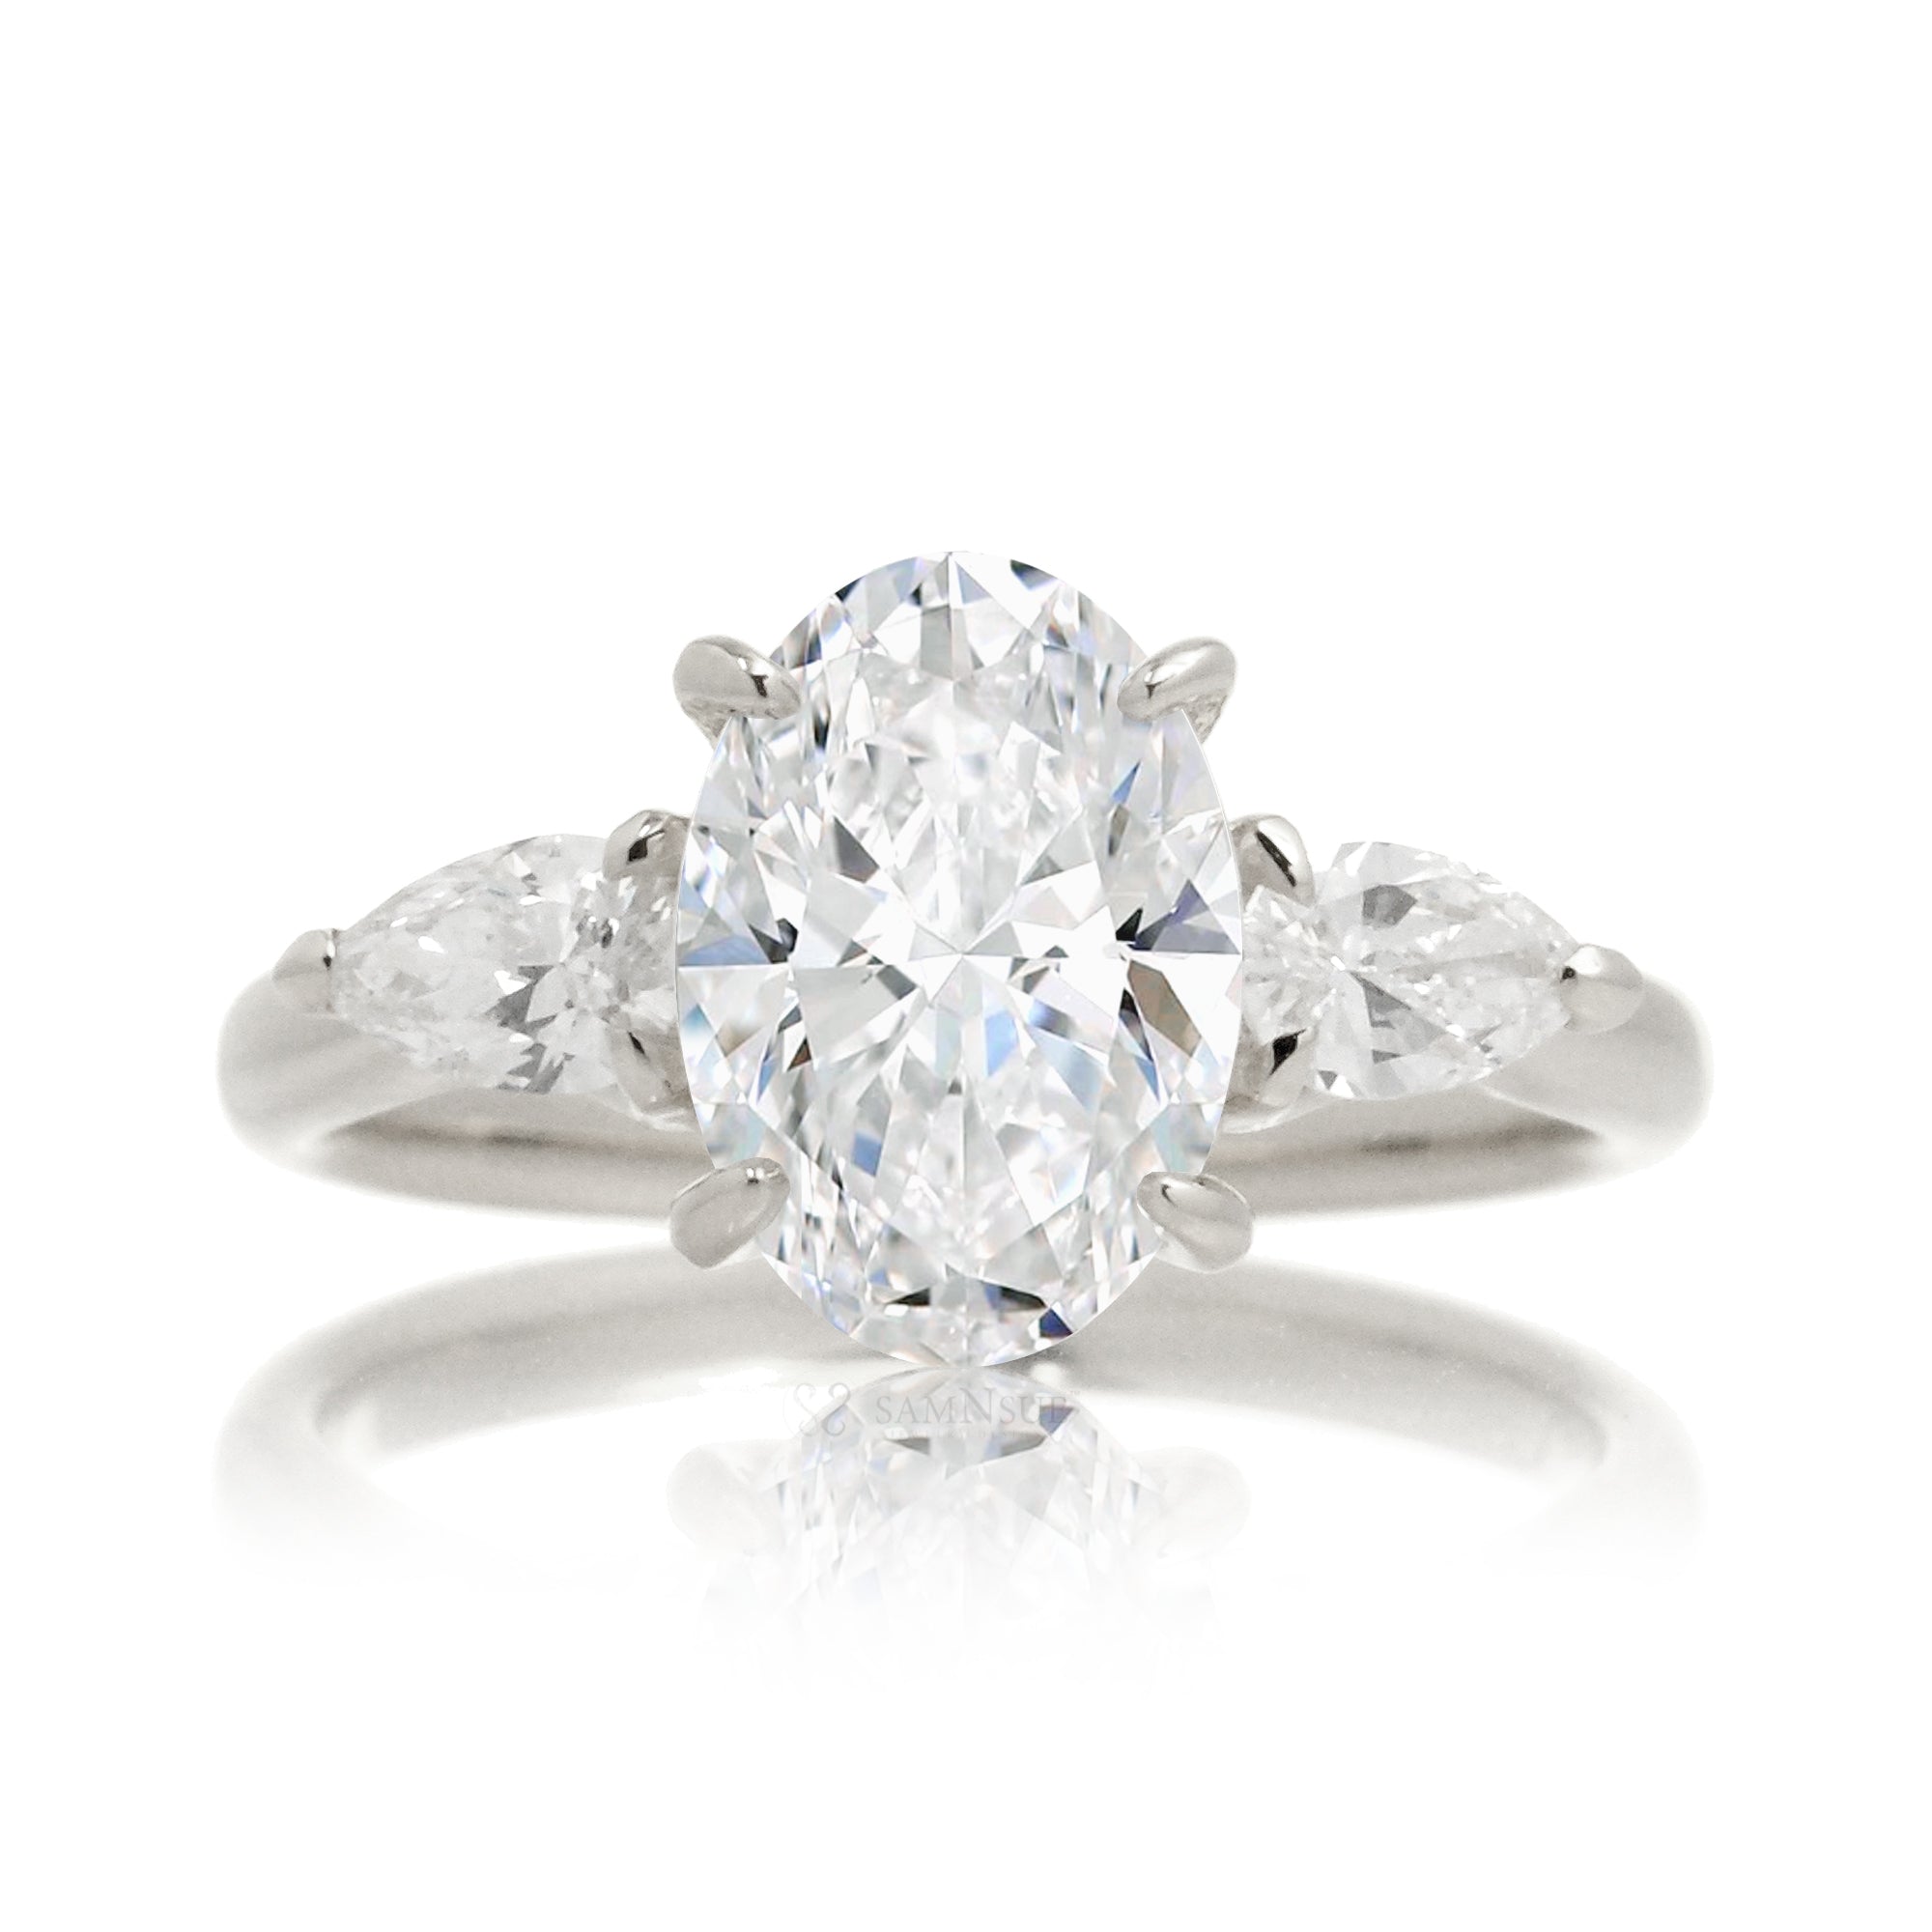 Pear side stone engagement ring in white gold or platinum